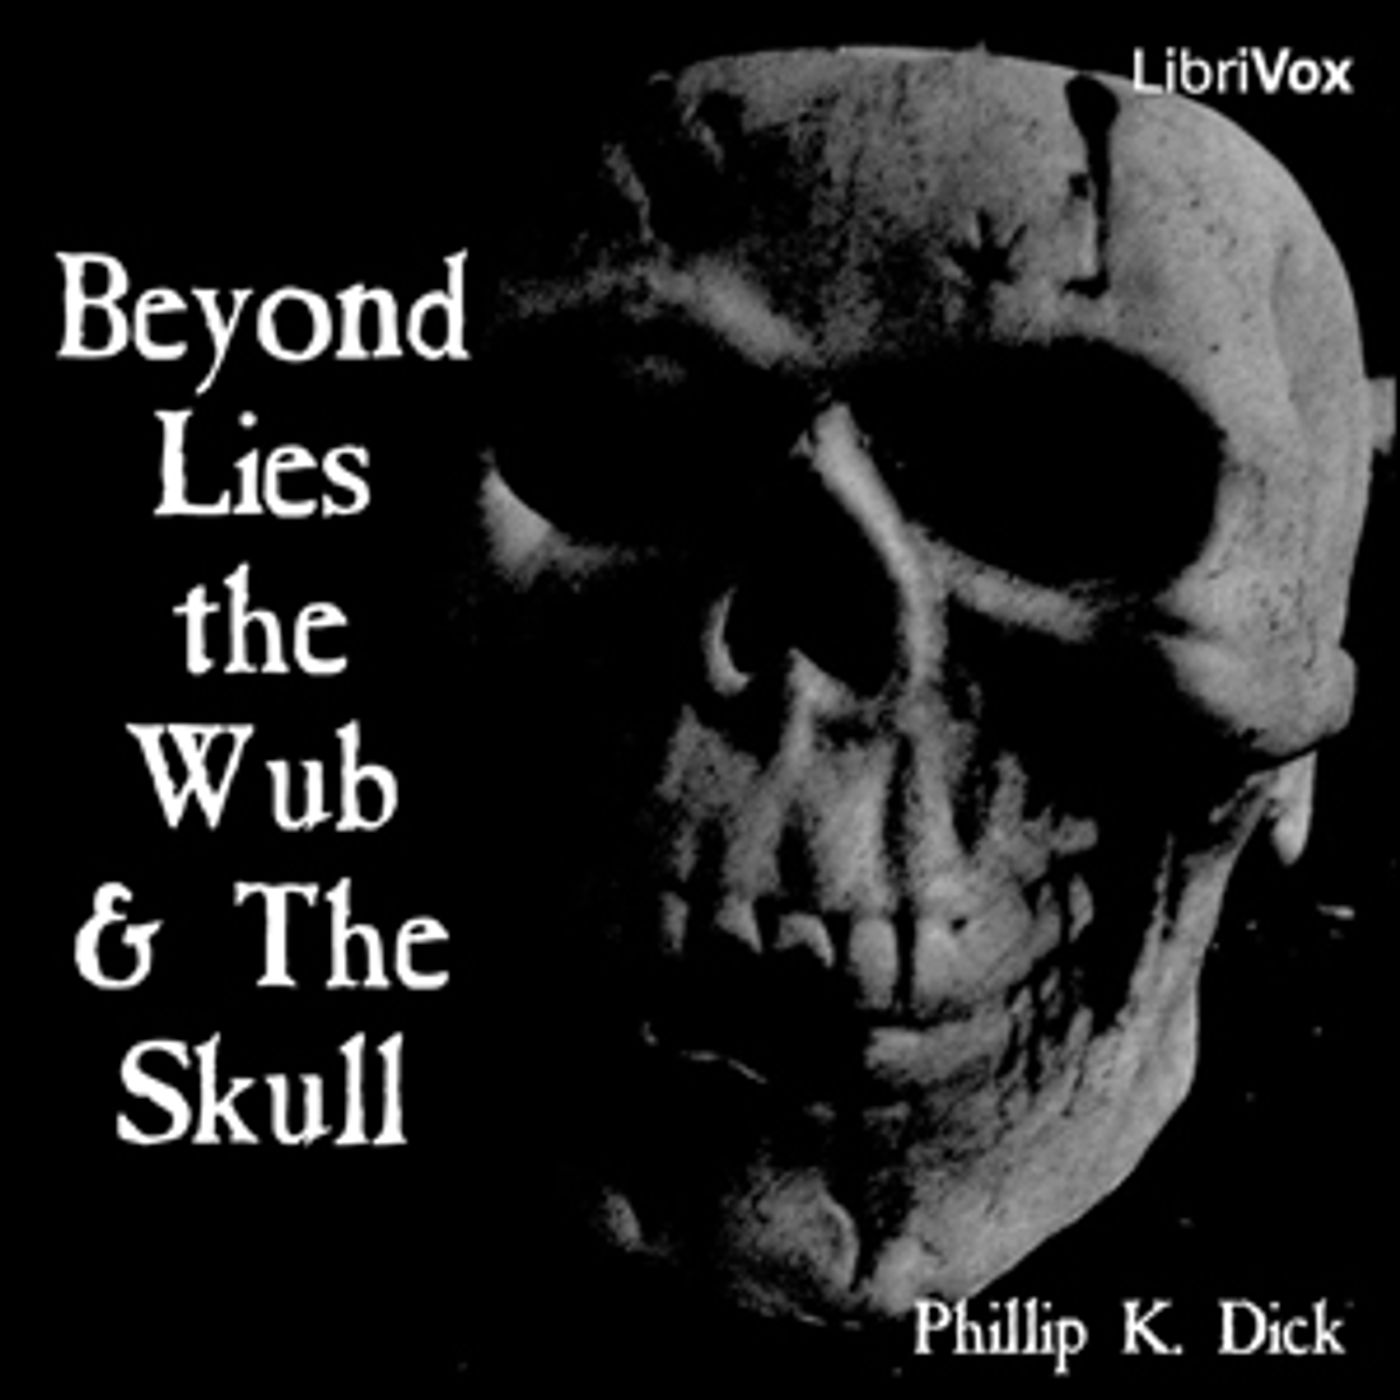 Beyond Lies the Wub & The Skull by Philip K. Dick (1928 – 1982)